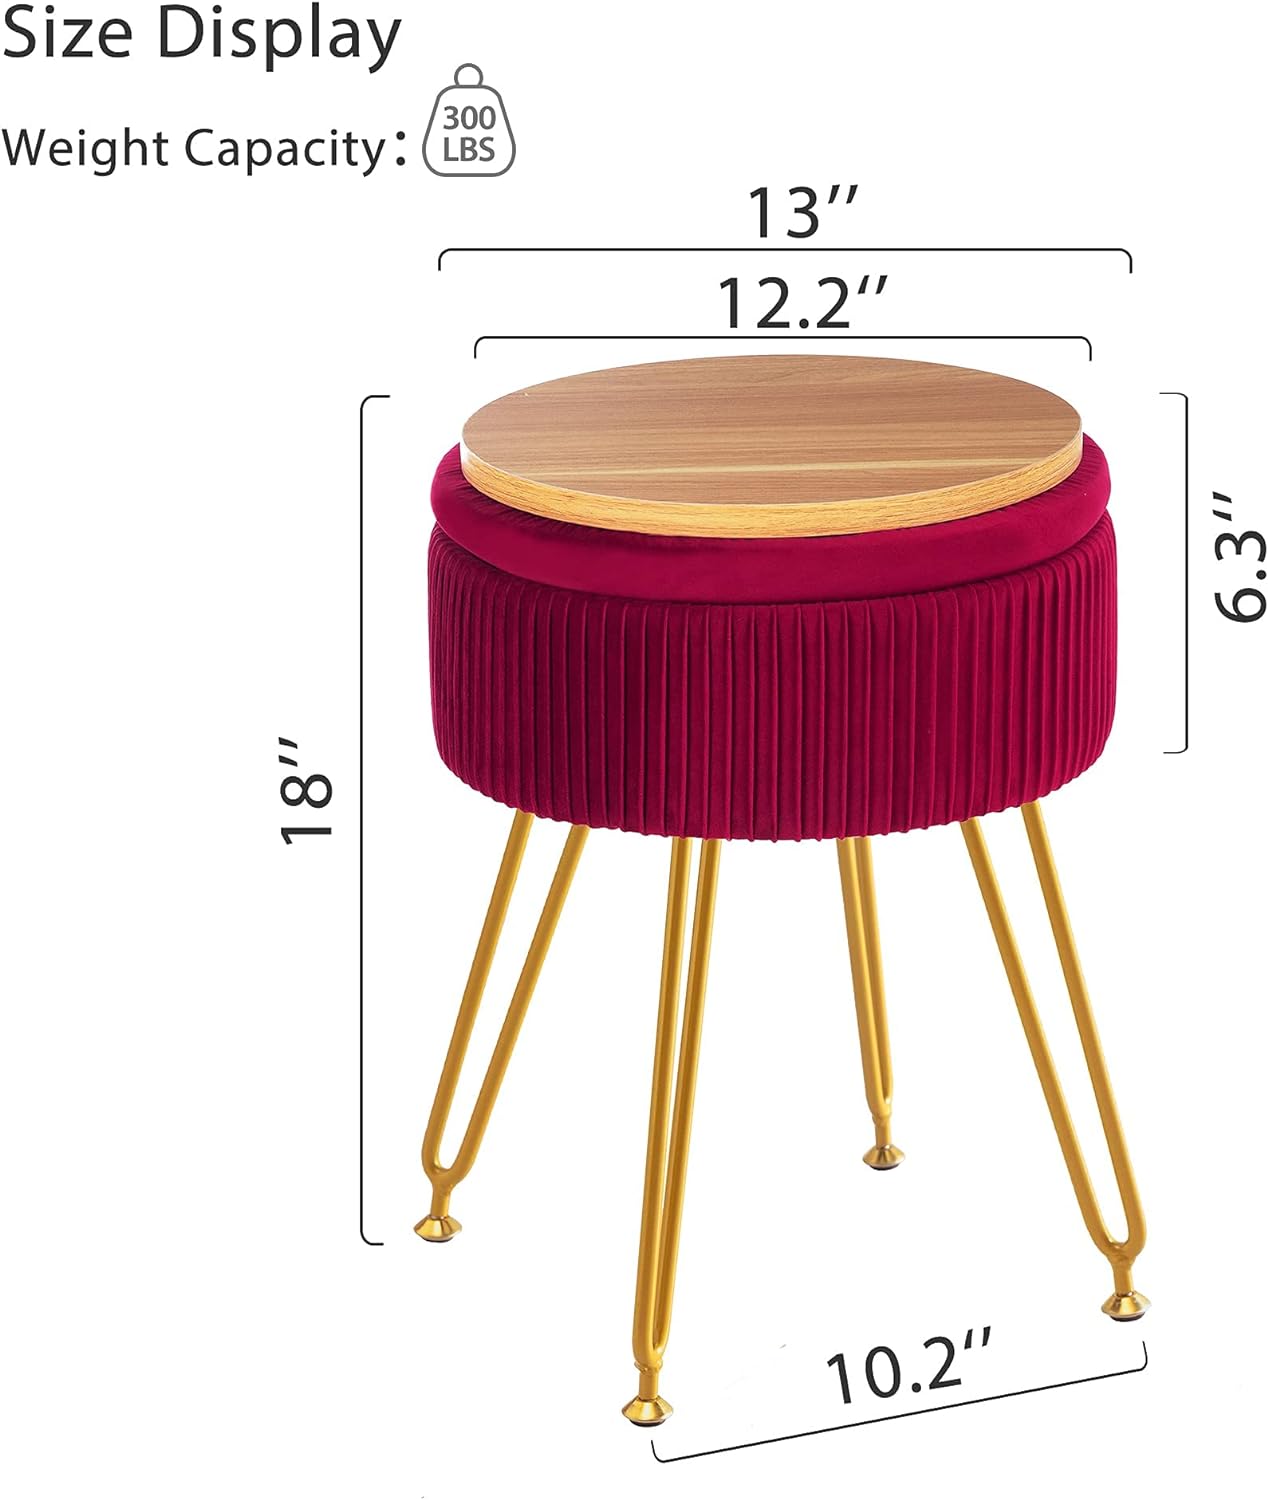 Velvet Vanity Stool Chair for Makeup Room, Rose Red Vanity Stool with Gold Legs,18” Height, Small Storage Ottoman Foot Ottoman Rest for Living Room, Bathroom